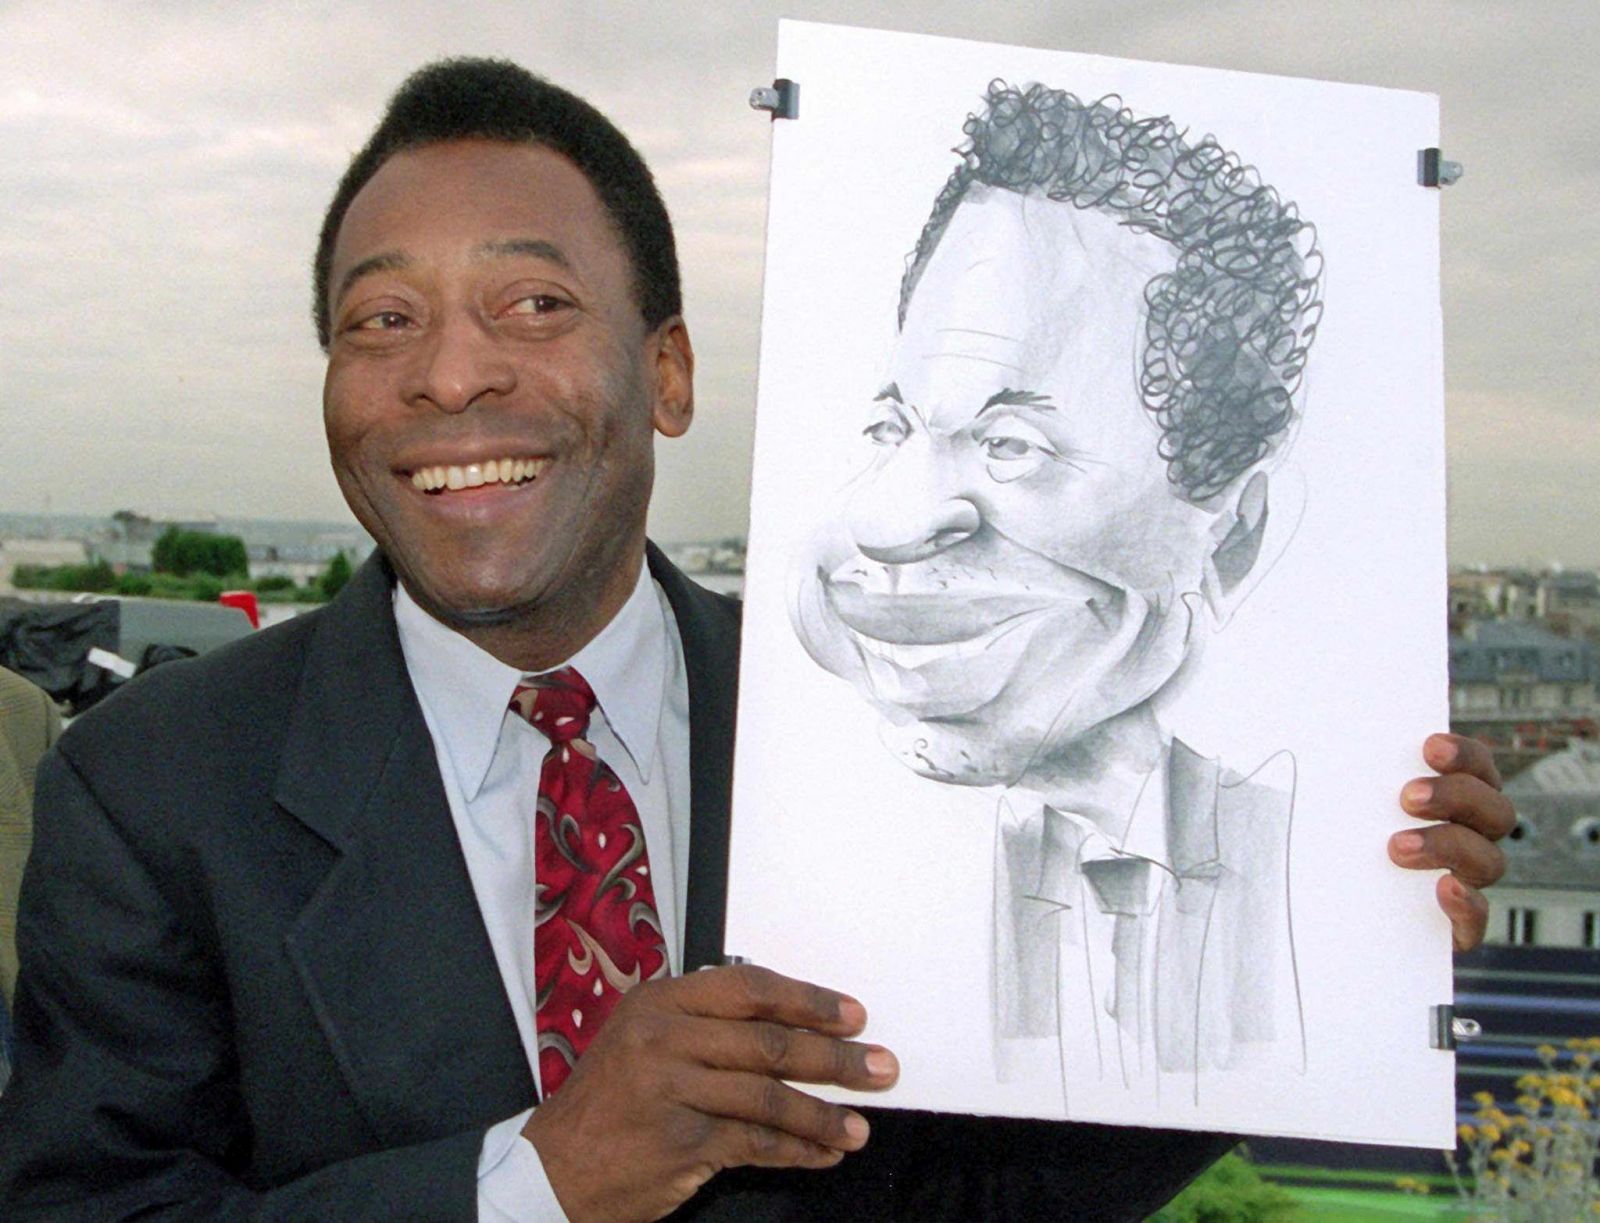 epa10381777 (FILE) - Brazilian soccer legend Pele poses with a caricature of himself at the German TV channel ZDF studio on the roof of a hotel, in Paris, France, 12 June 1998 (reissued 29 December 2022). According to his agent, Pele, whose proper name is Edson Arantes do Nascimento, has died on 28 December 2022 at age 82.  EPA/PETER KNEFFEL *** Local Caption *** 99427778